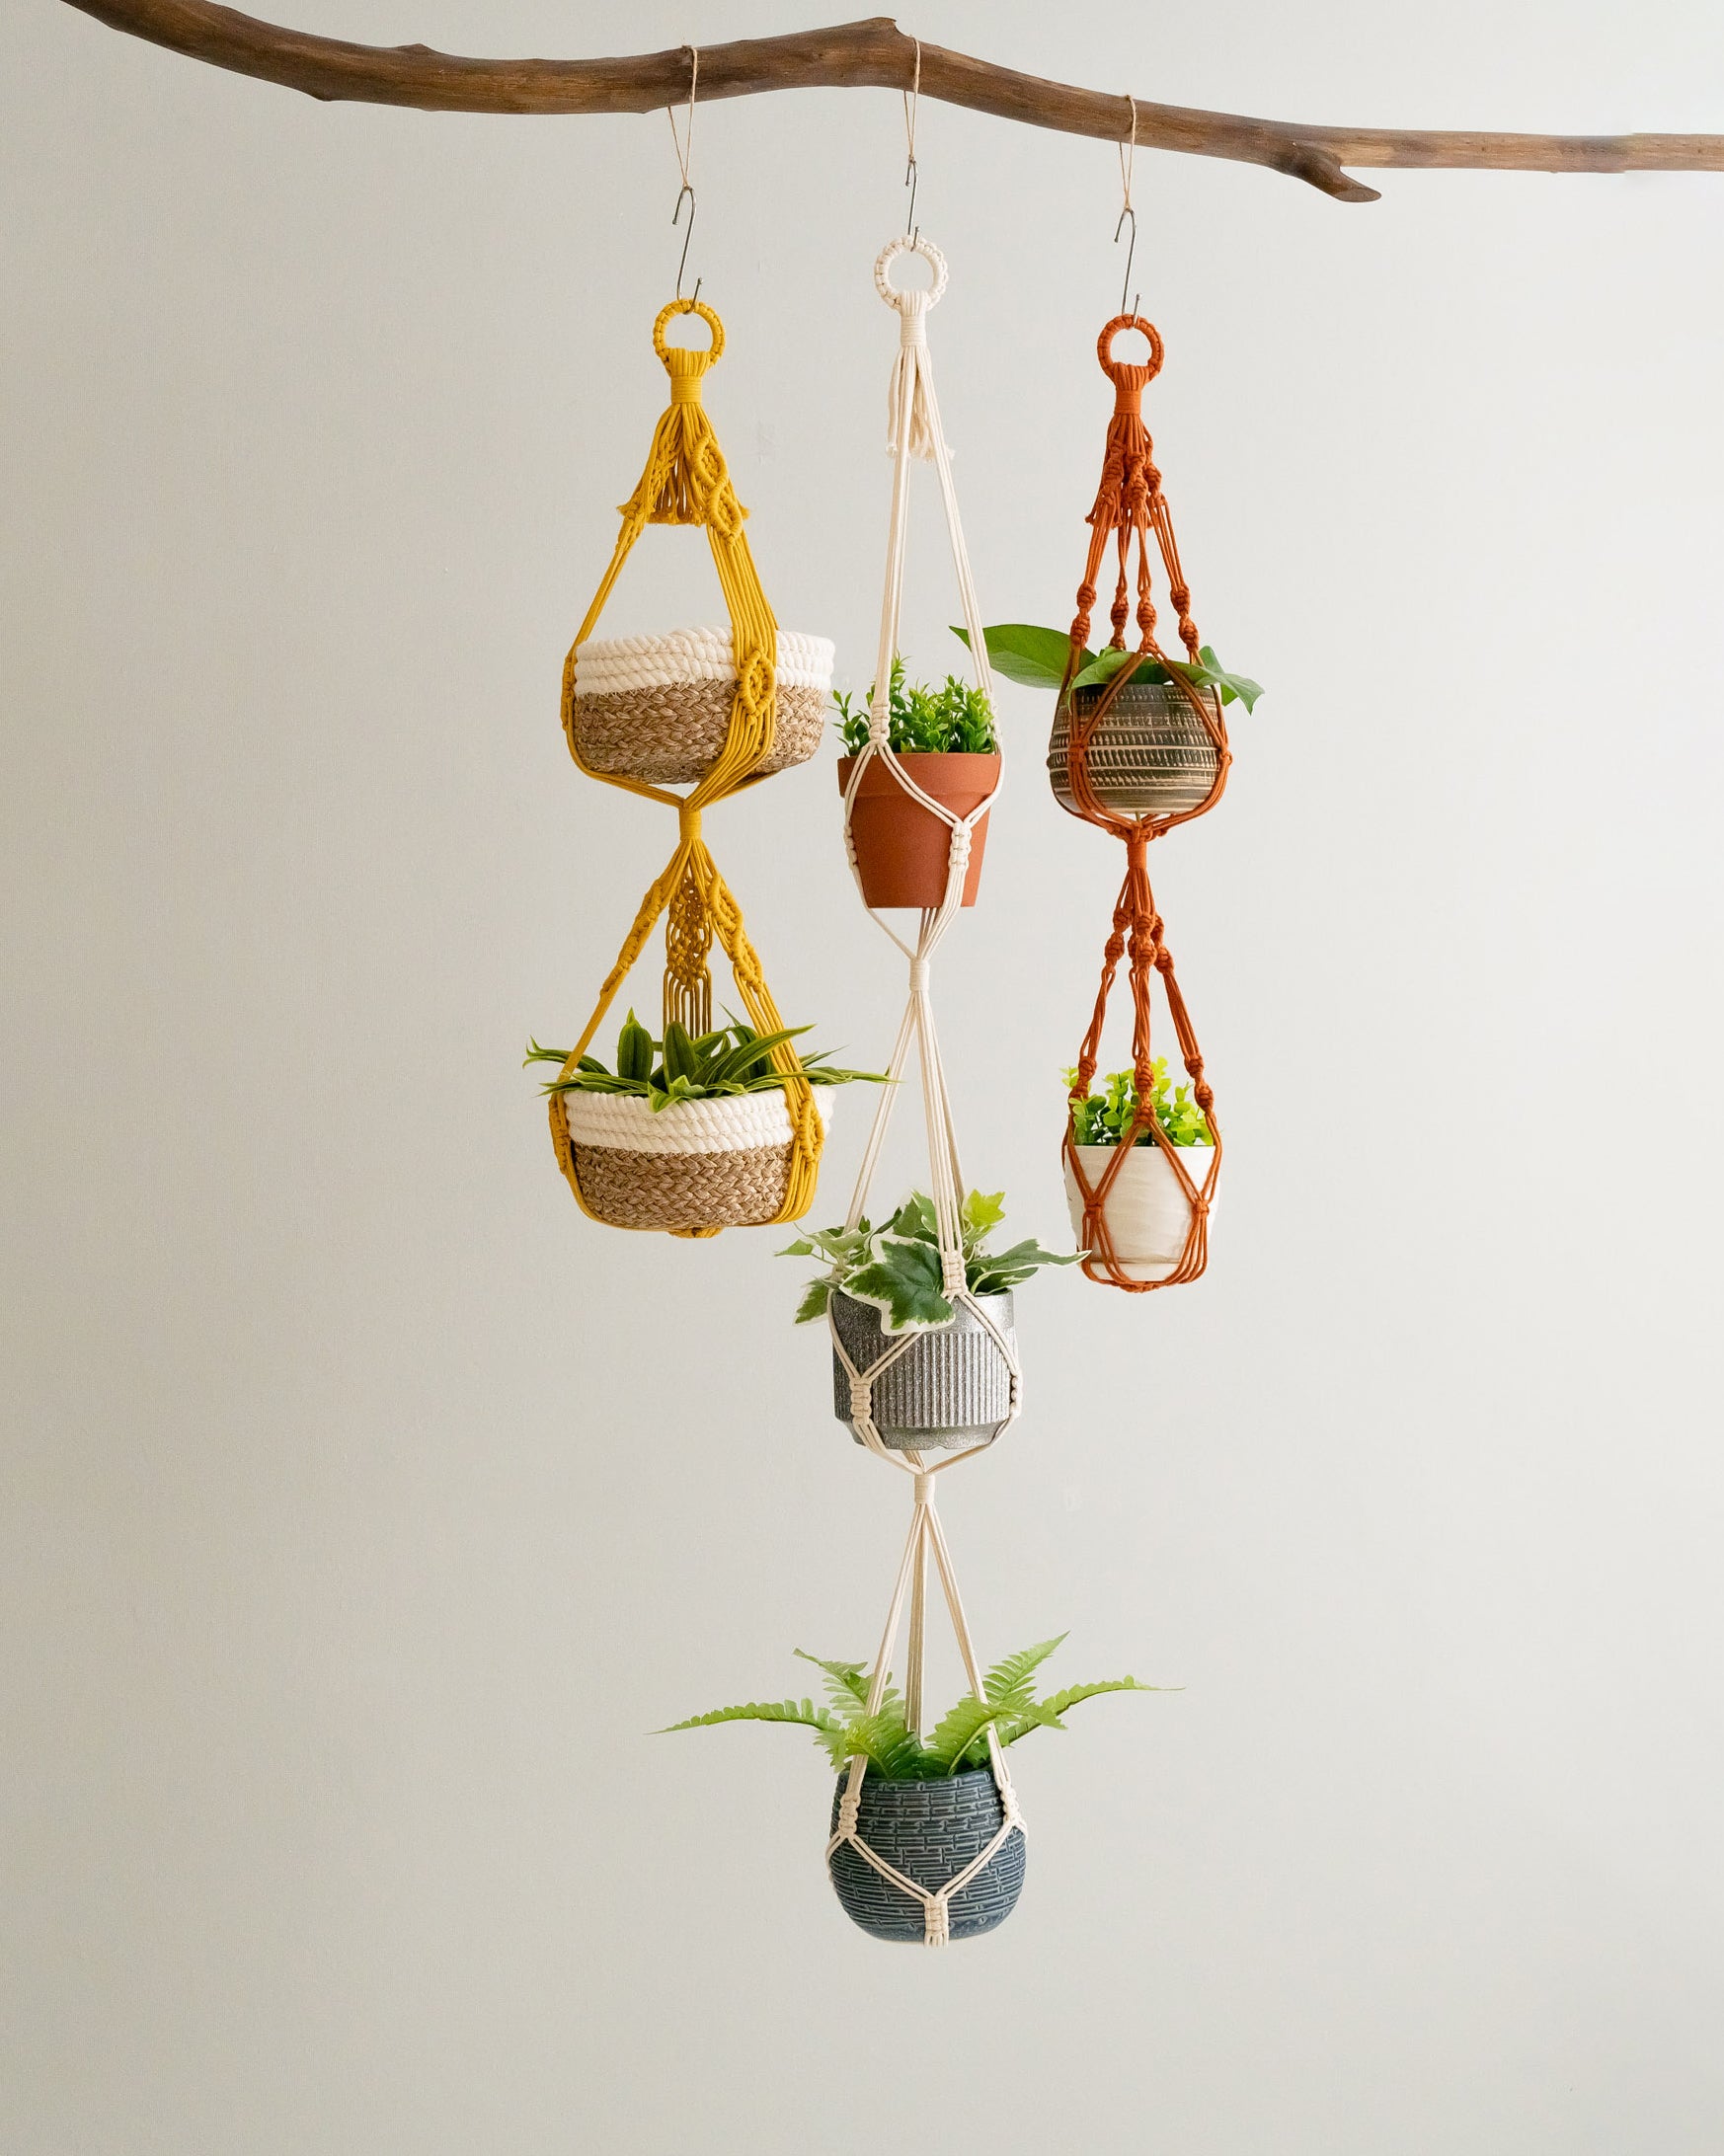 No Tail Macrame Plant Holder for Stylish Indoor Planters